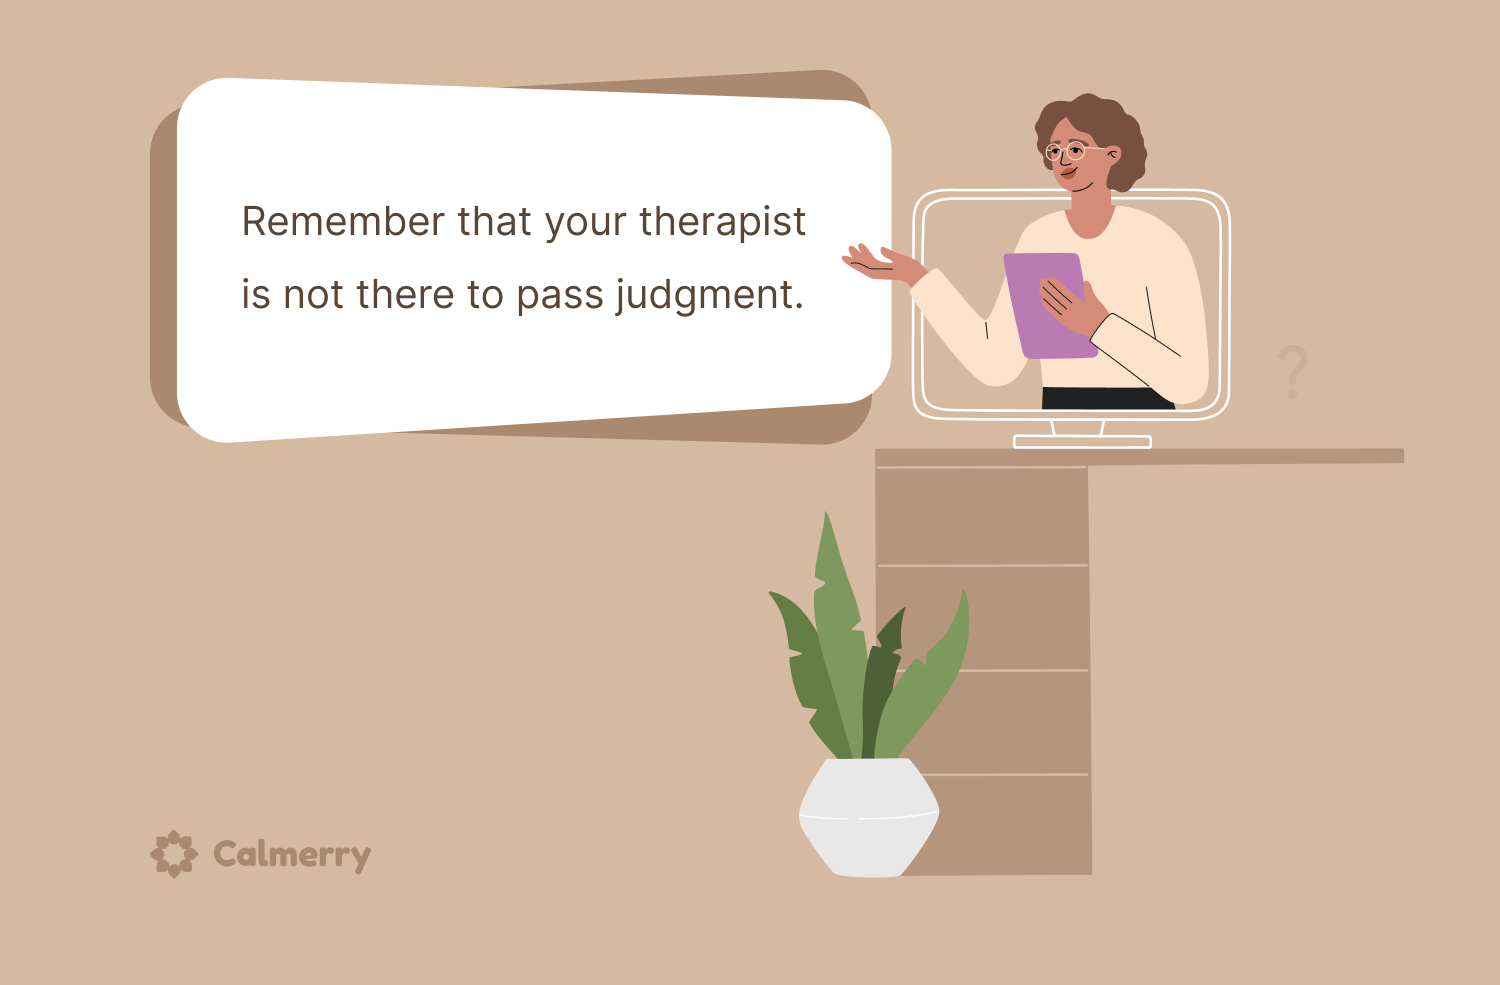 Remember that your therapist is not there to pass judgment